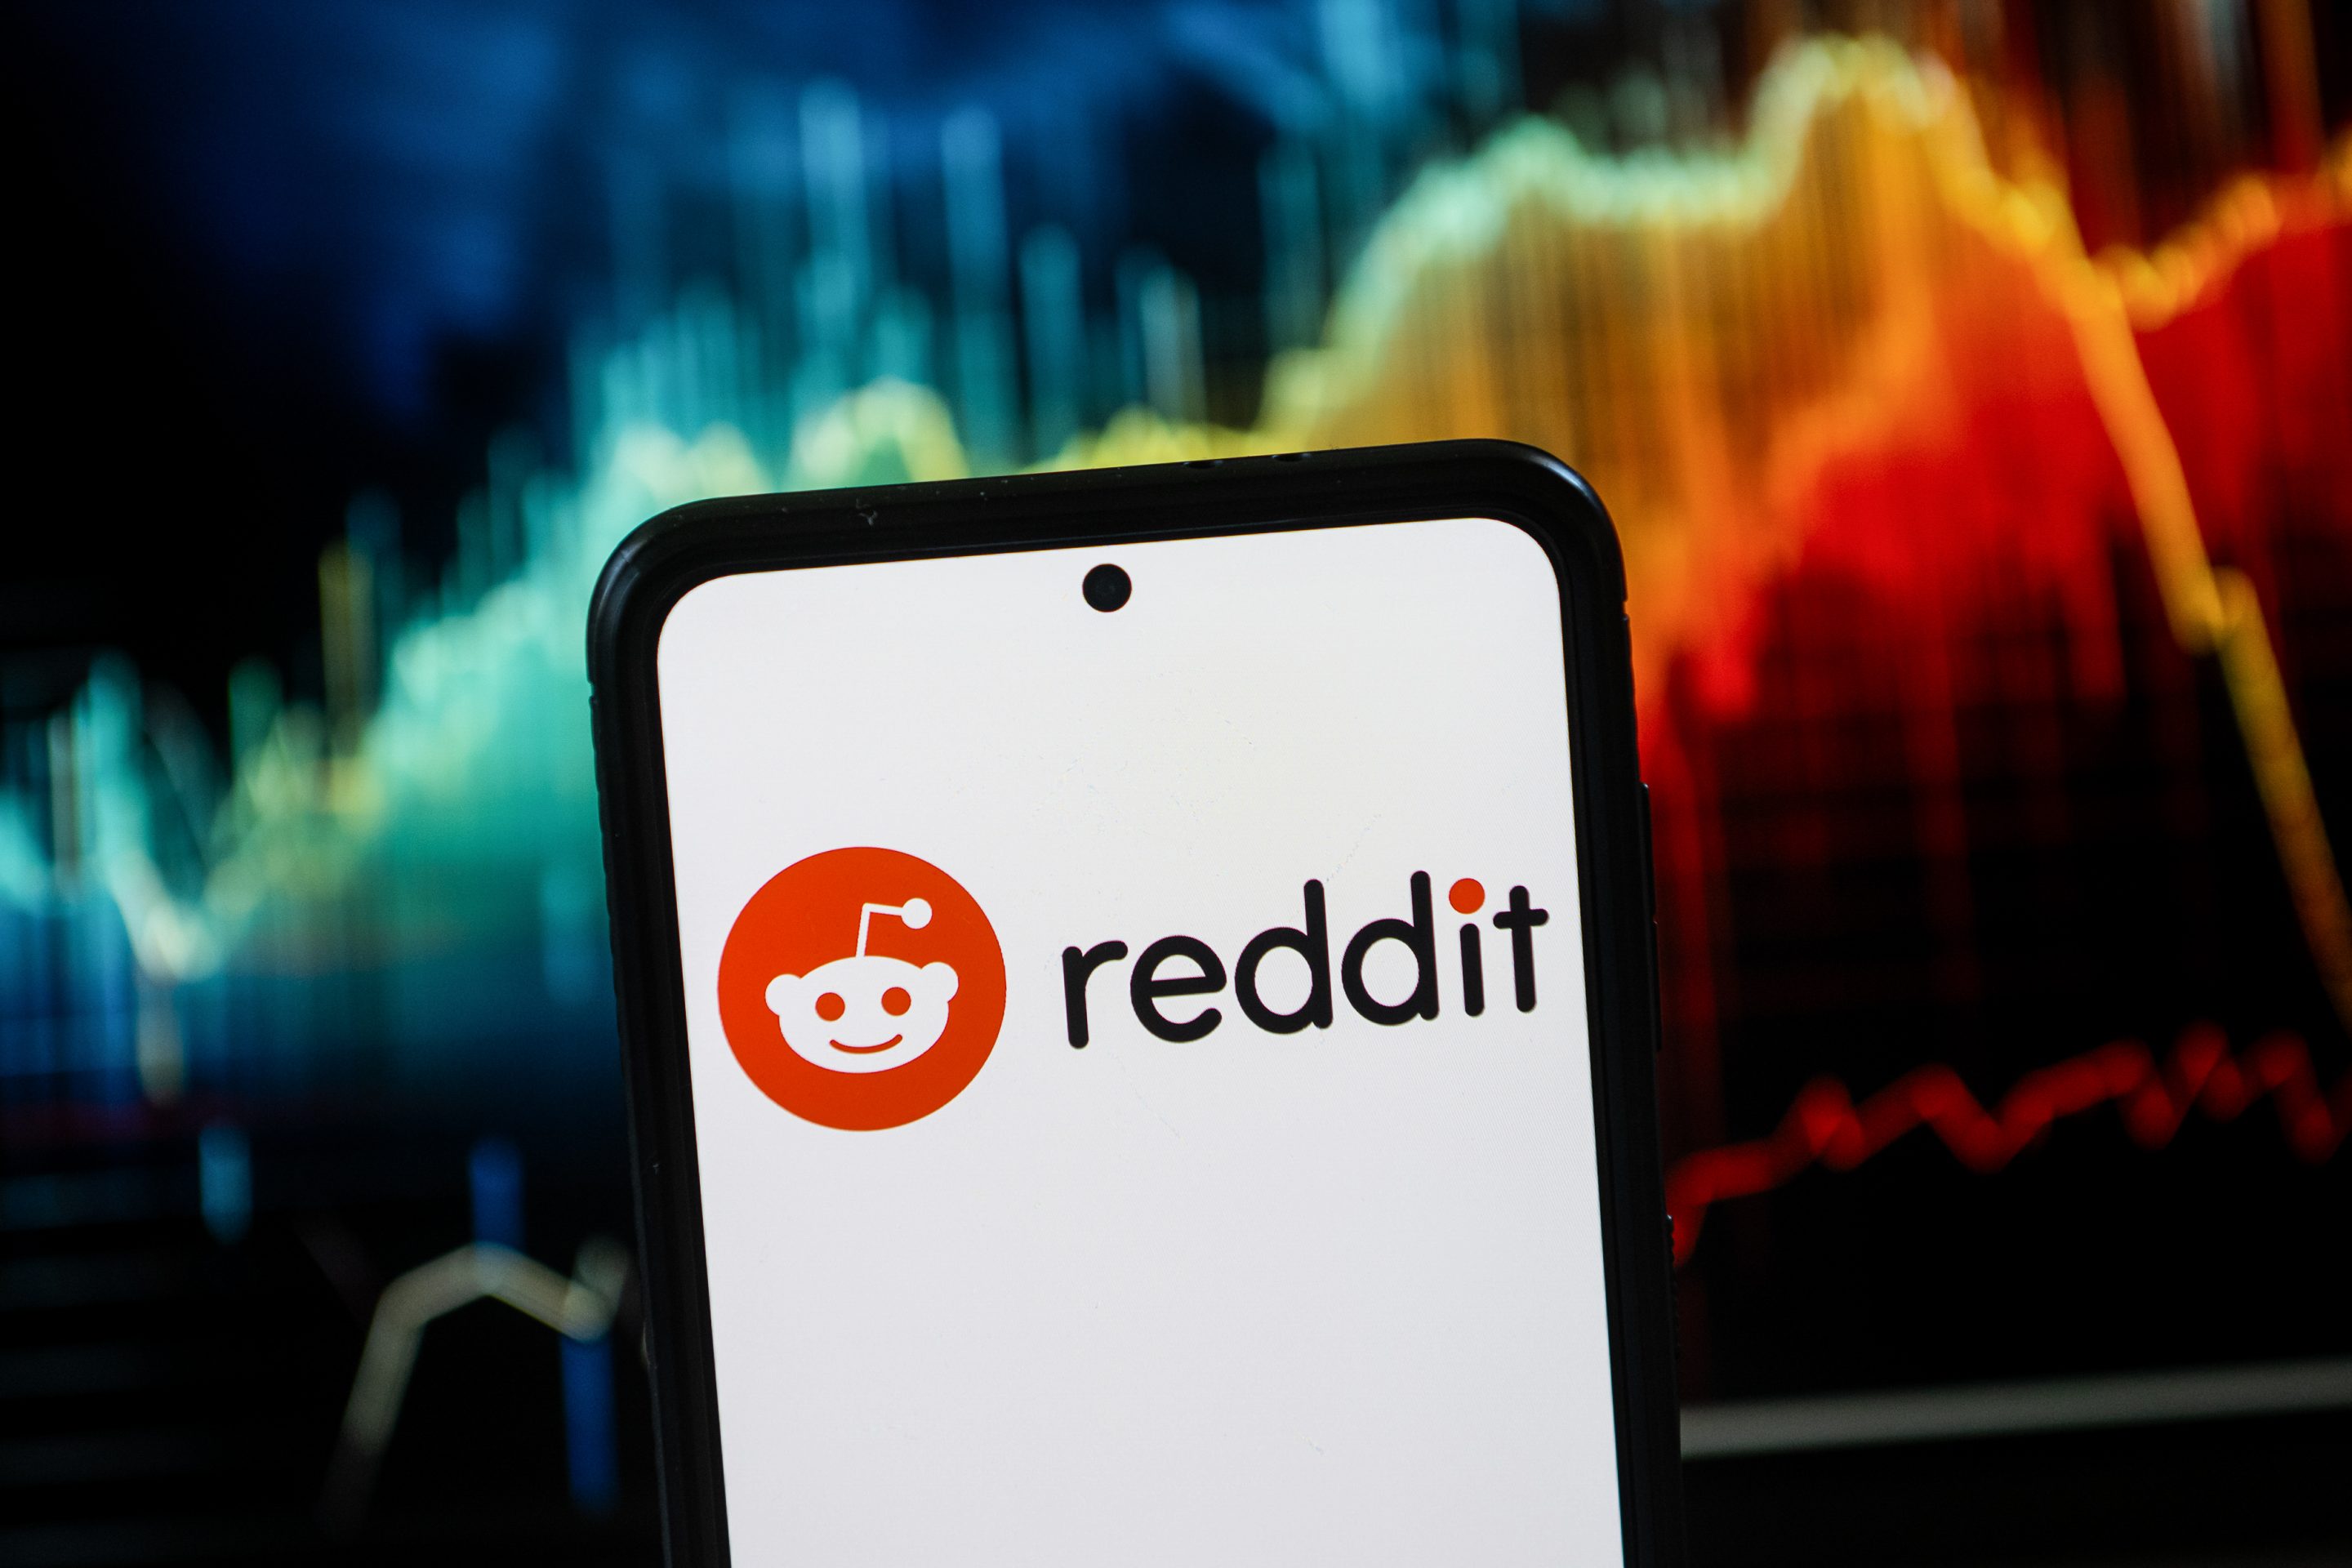 Reddit Asks Users to Prove Demand for Bitcoin Ad Payments | CoinDesk